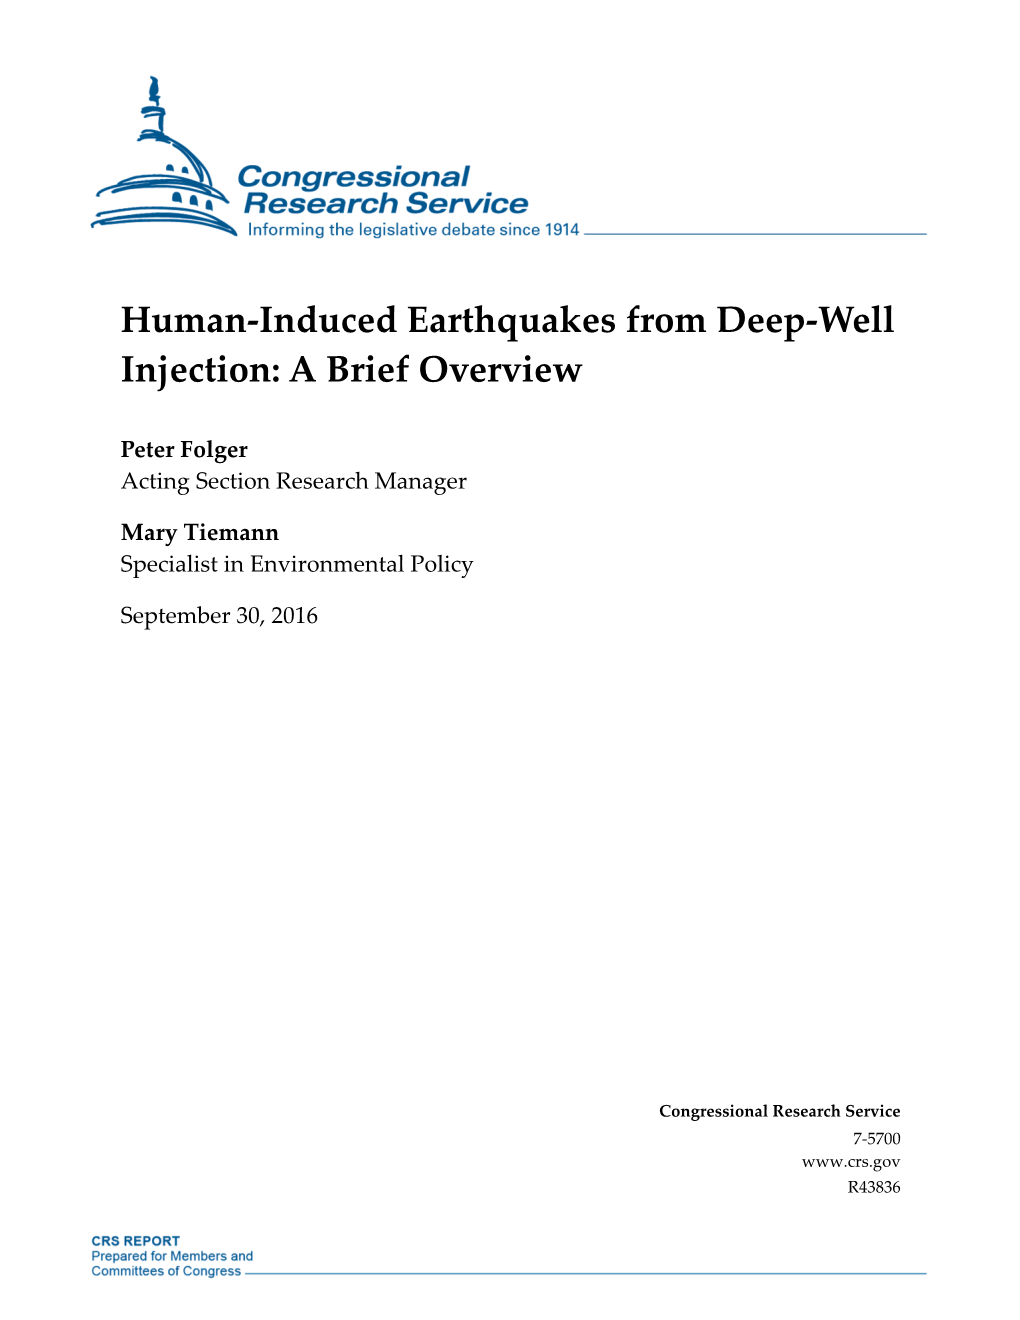 Human-Induced Earthquakes from Deep-Well Injection: a Brief Overview